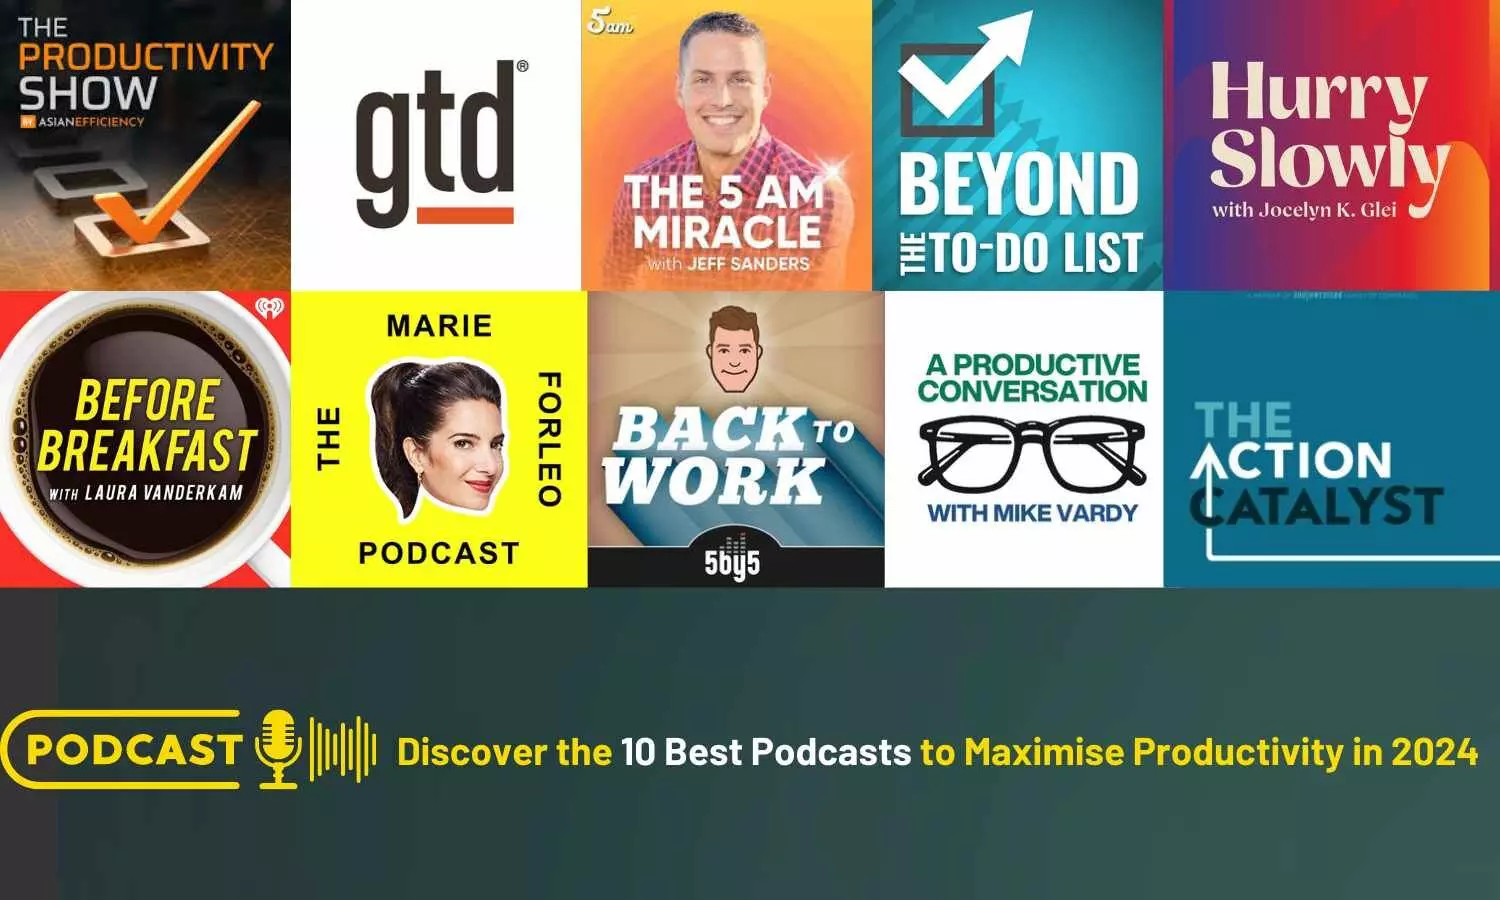 Discover the 10 Best Podcasts to Maximise Productivity in 2024